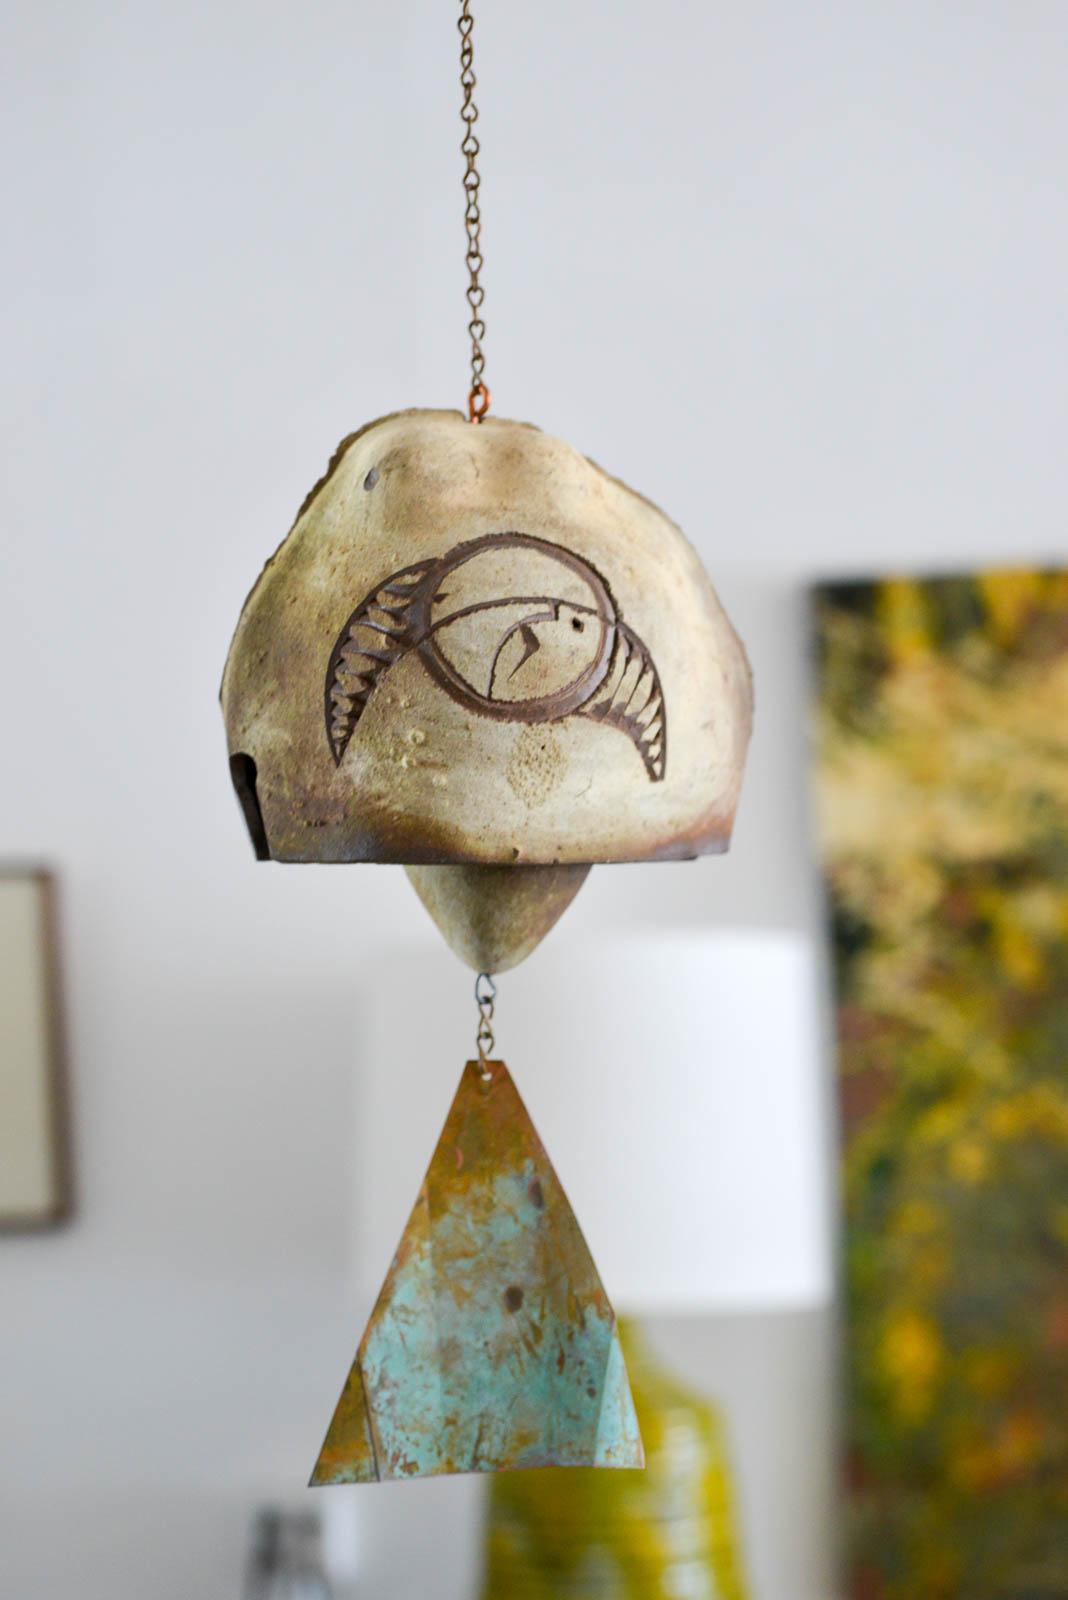 Vintage ceramic windbell by Paolo Soleri, ca. 1980. Beautiful original ceramic bell with original kite. Also comes with original box and paperwork. Measures 8